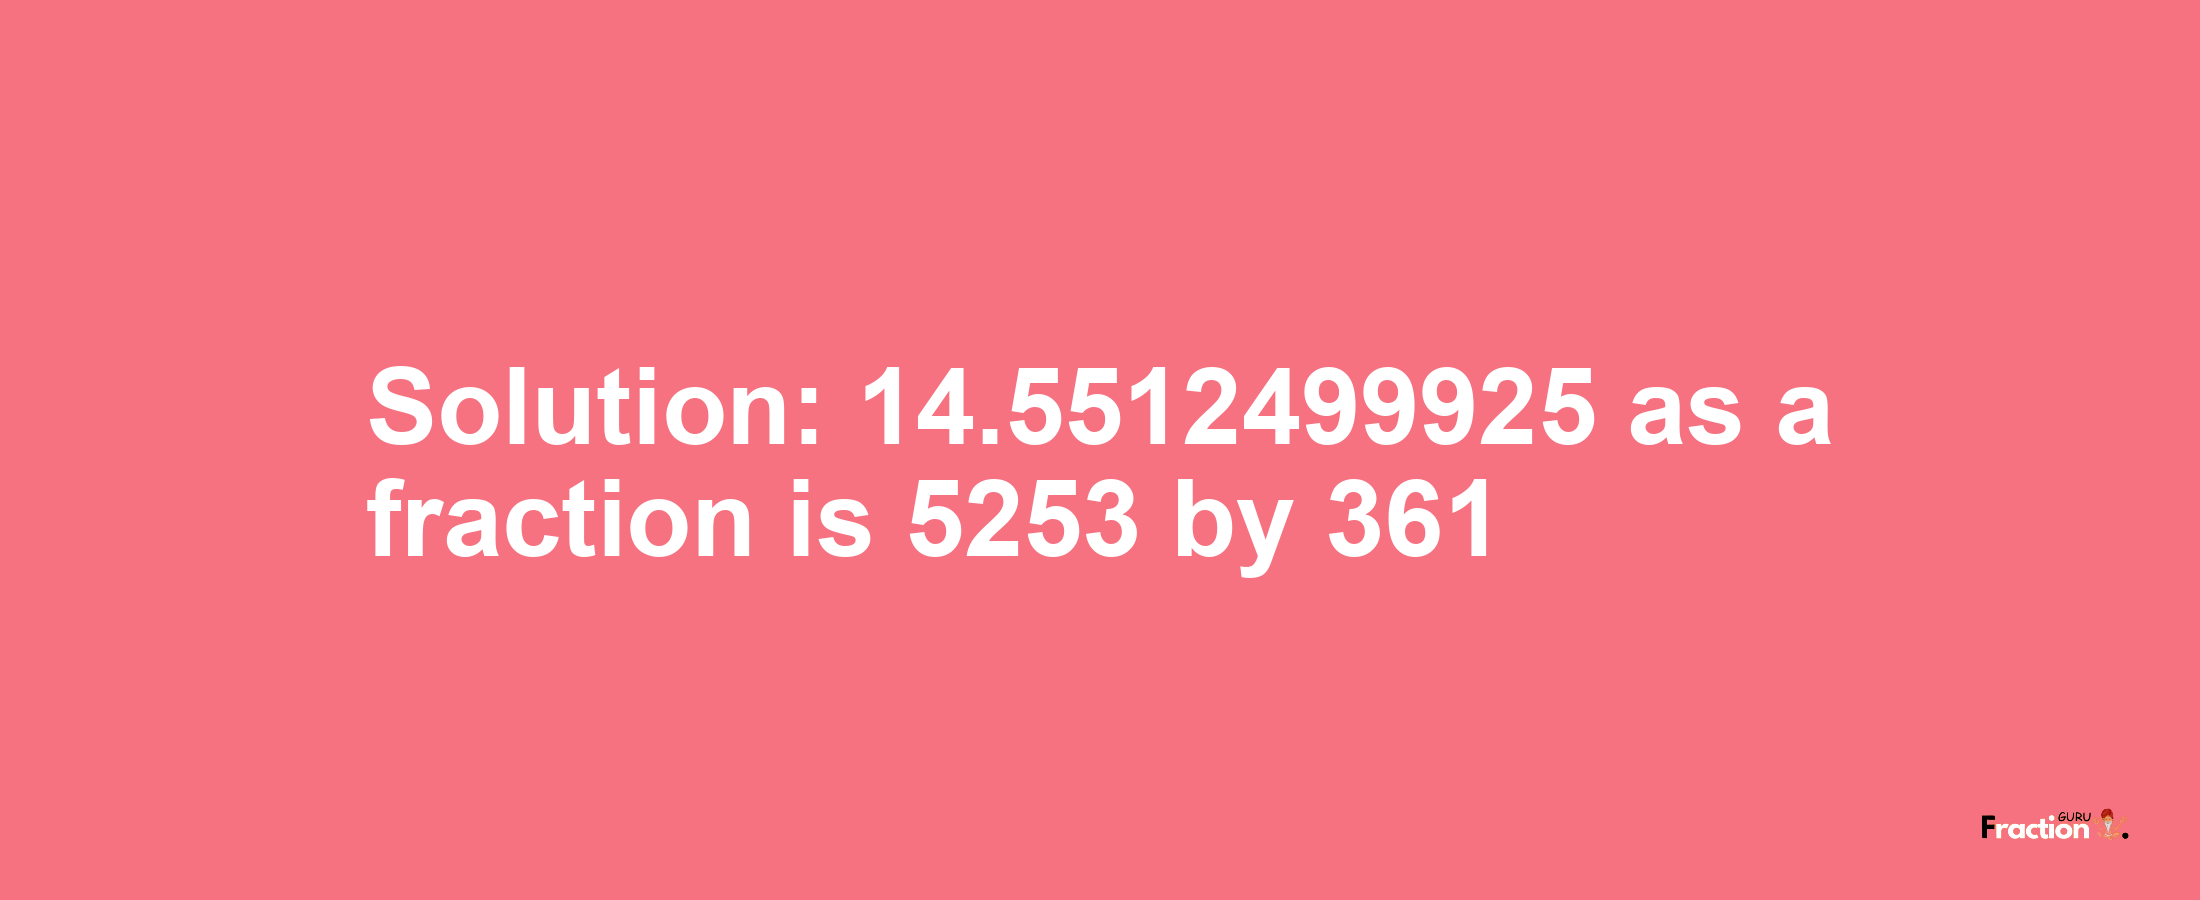 Solution:14.5512499925 as a fraction is 5253/361